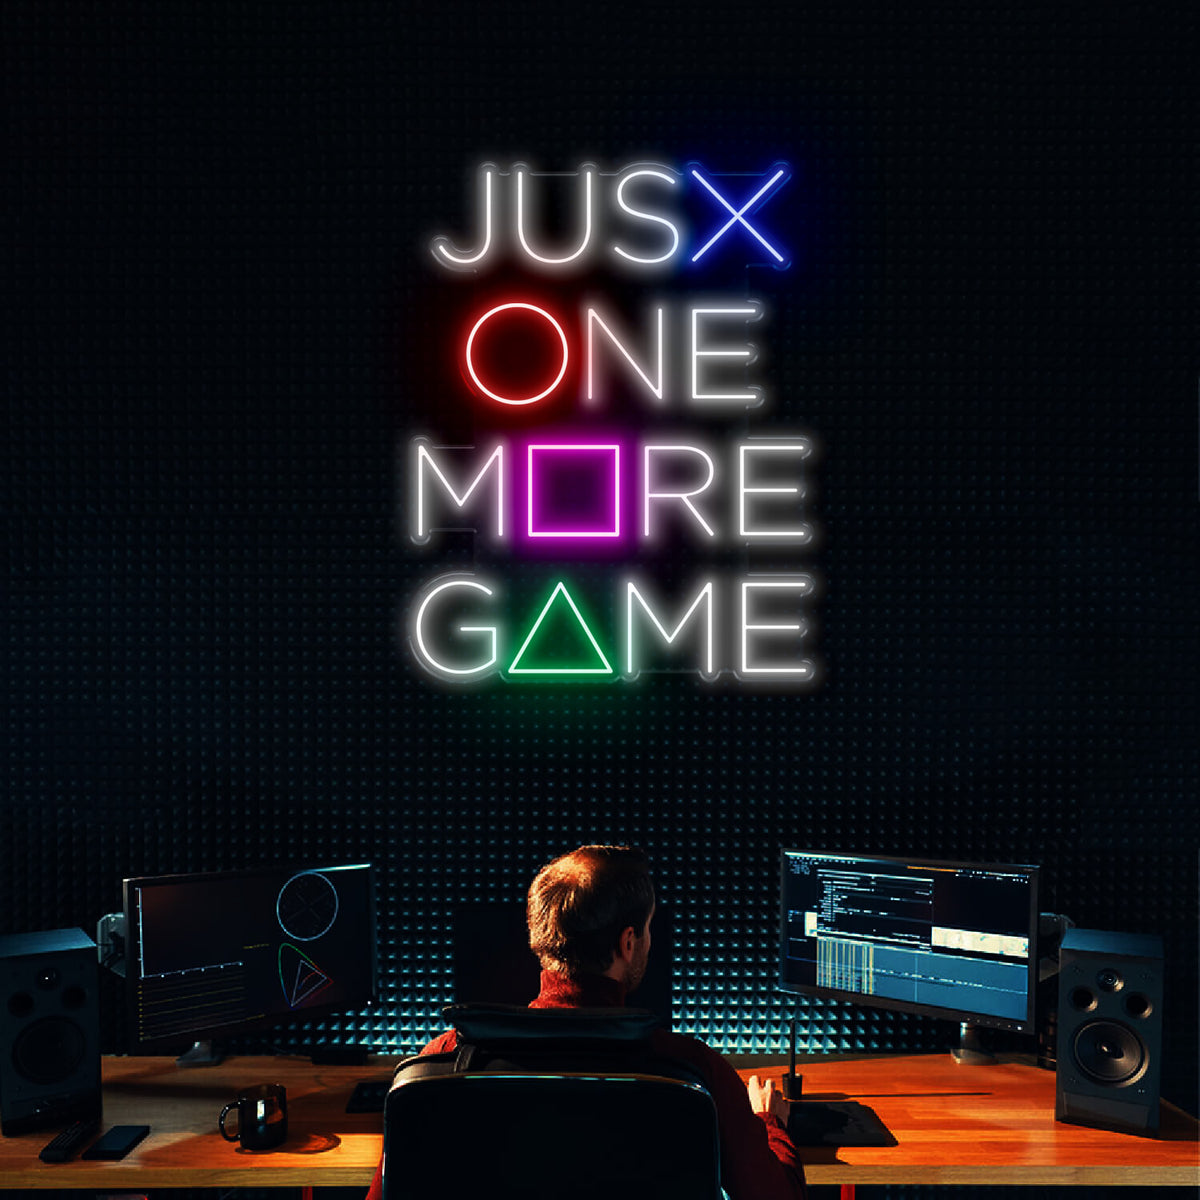 Just One More Game neon sign